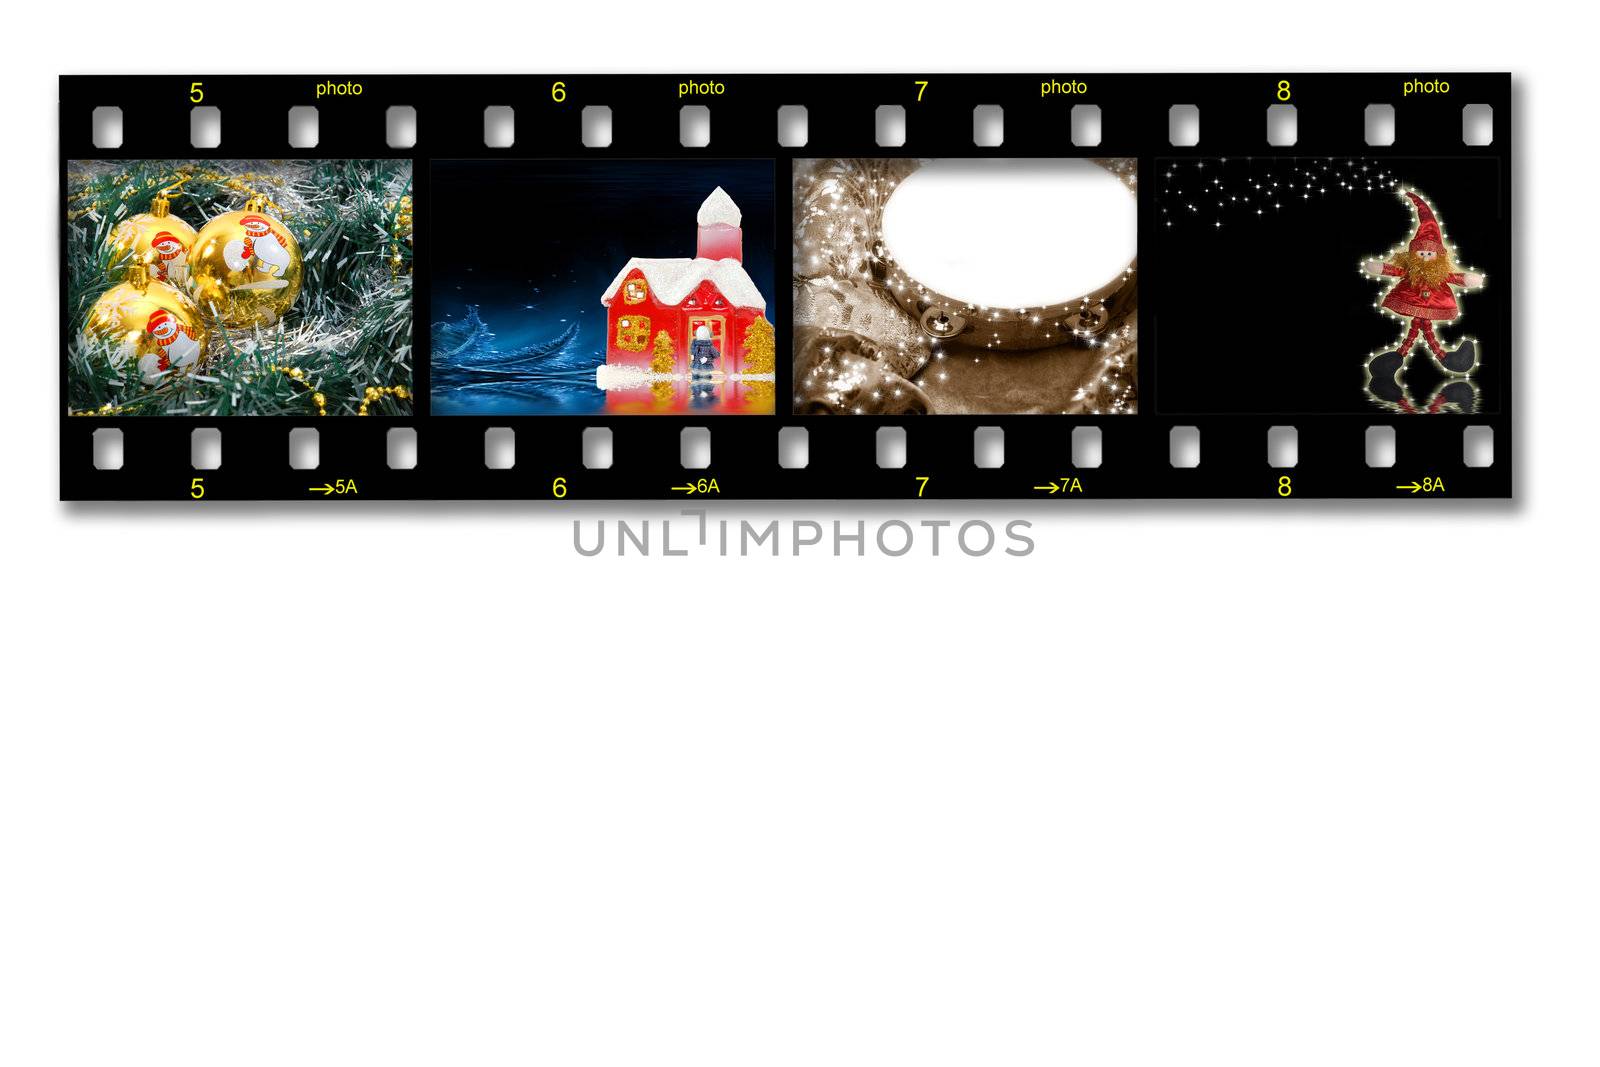 35mm slide film with Christmas photos on white background